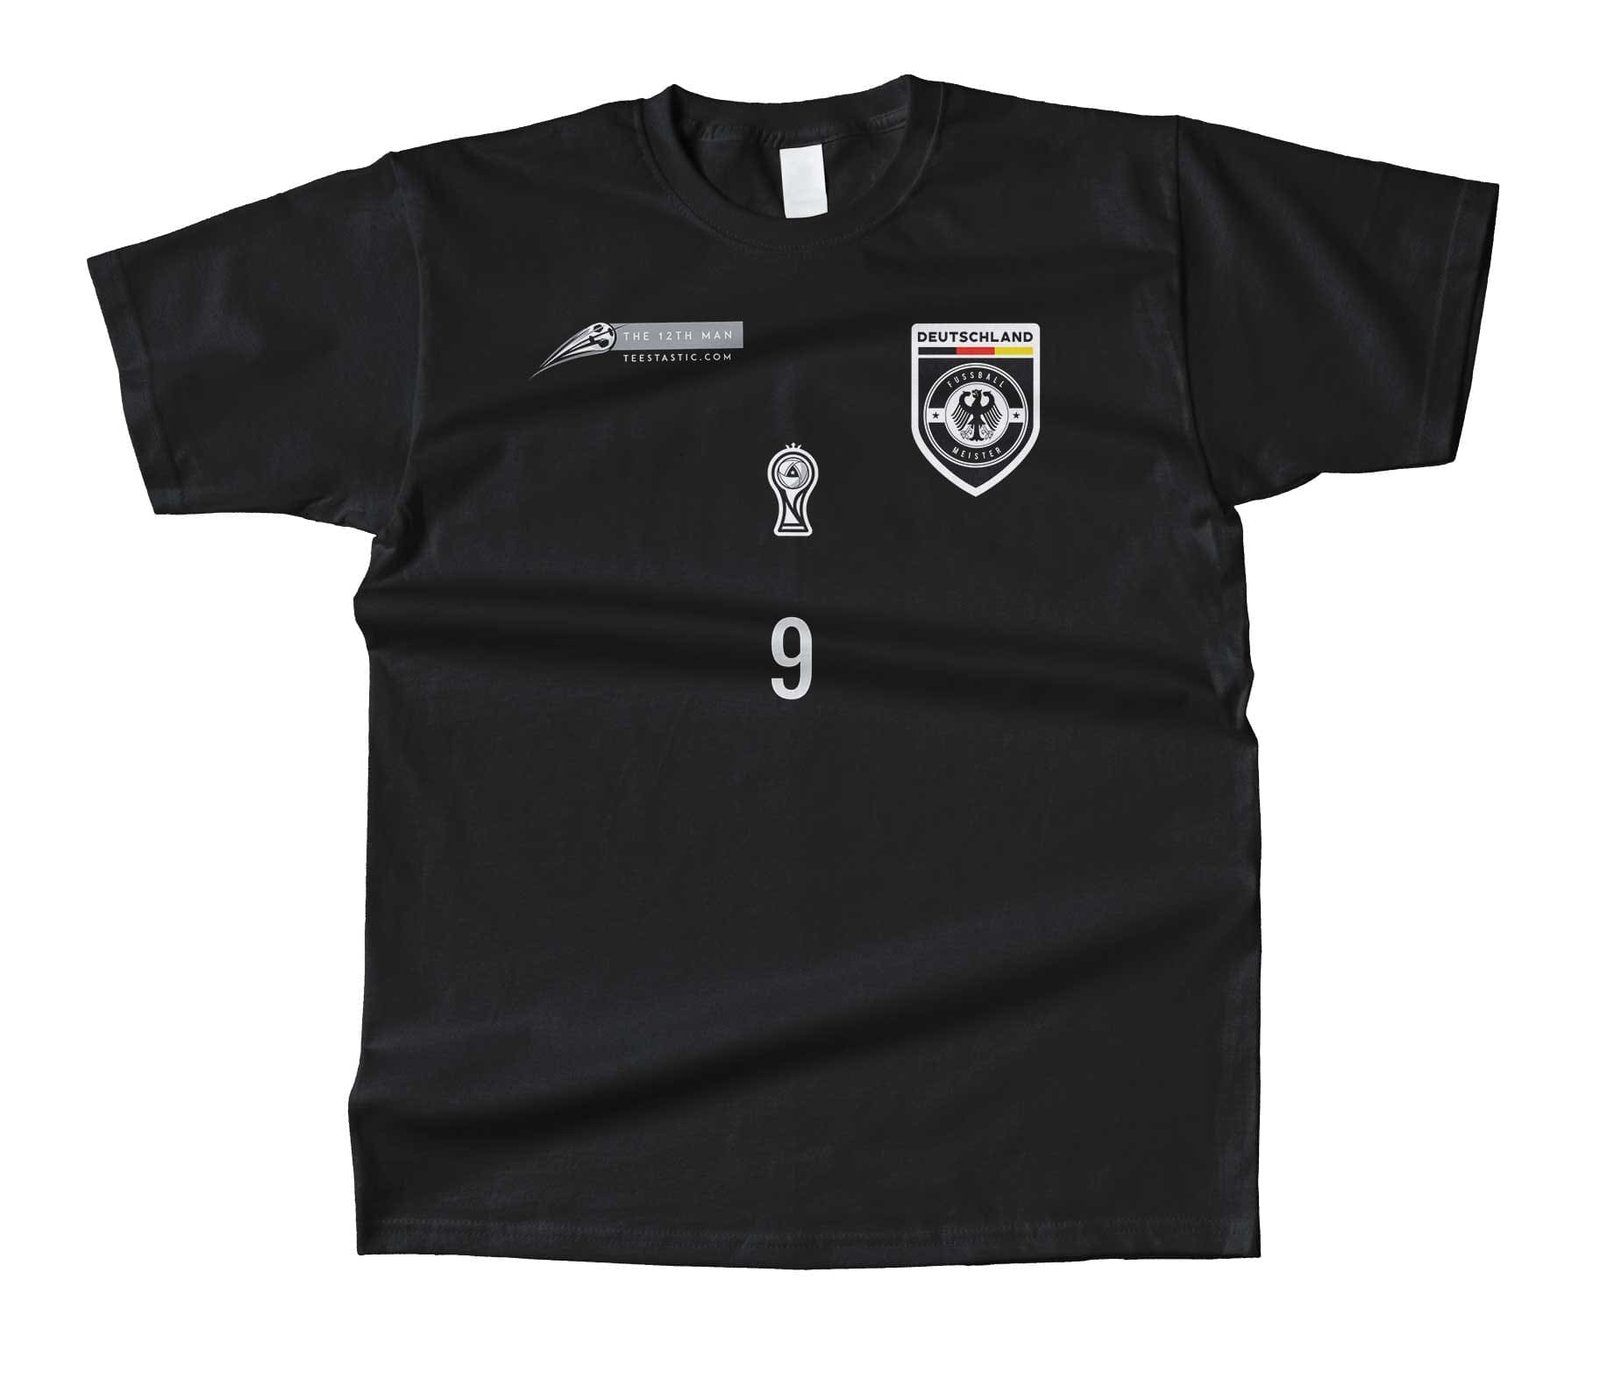 A Germany/Deutschland football t-shirt with the number 9 on it.